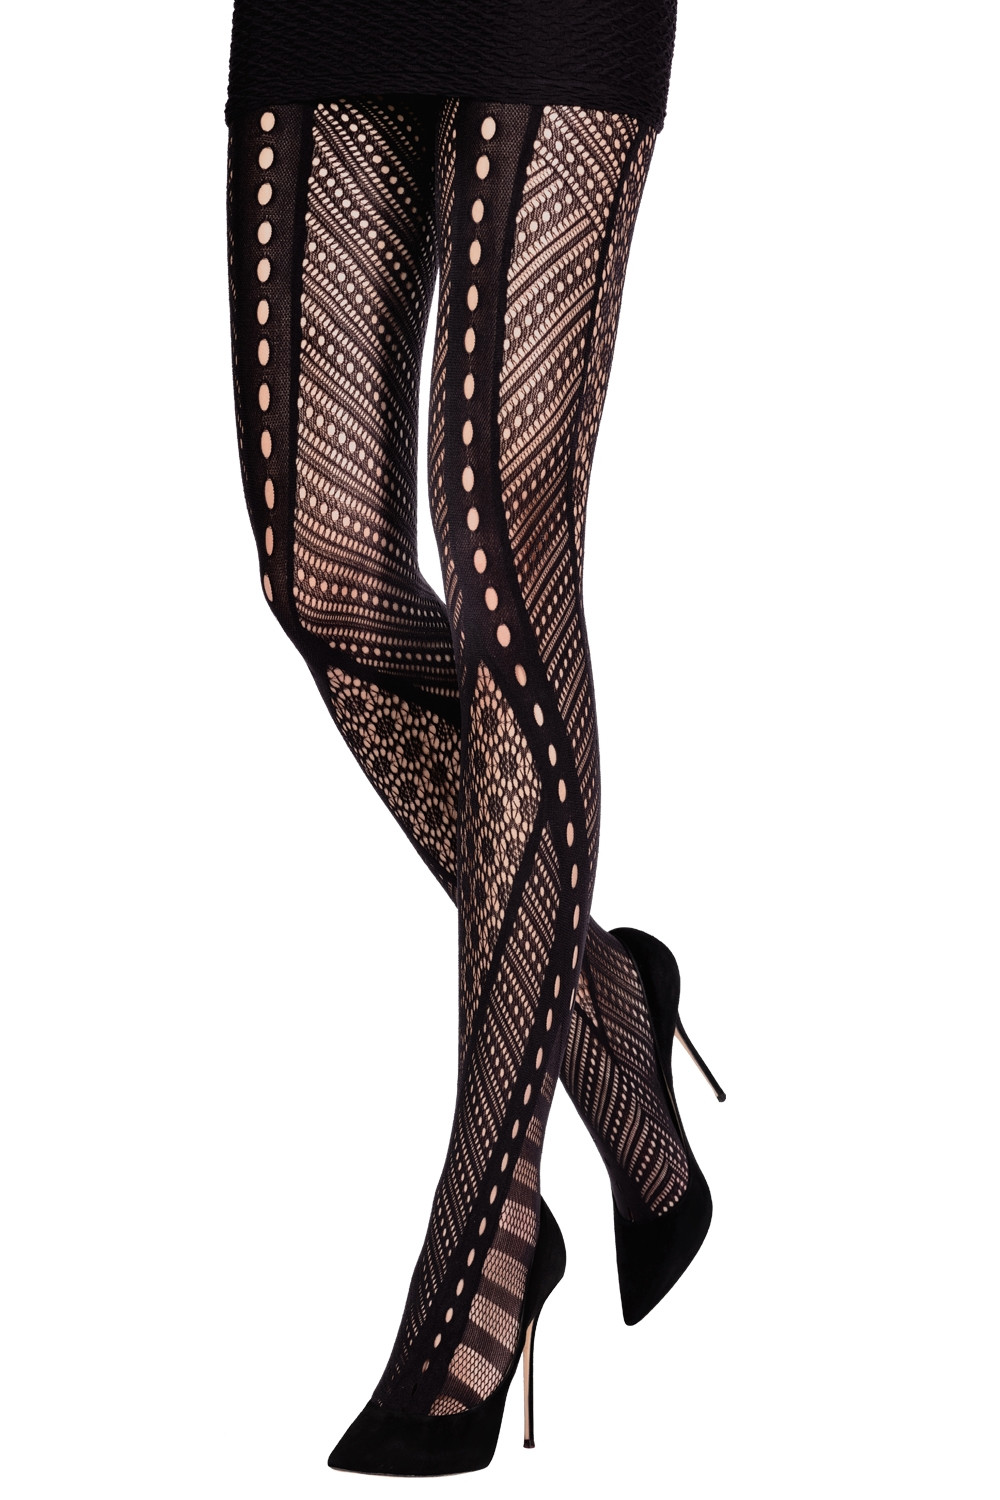 Sexy Lace Transparent Net Leggings For Women Perfect Christmas Gift For  Girls Brand Tight Stocking From Dhtiger, $26.45